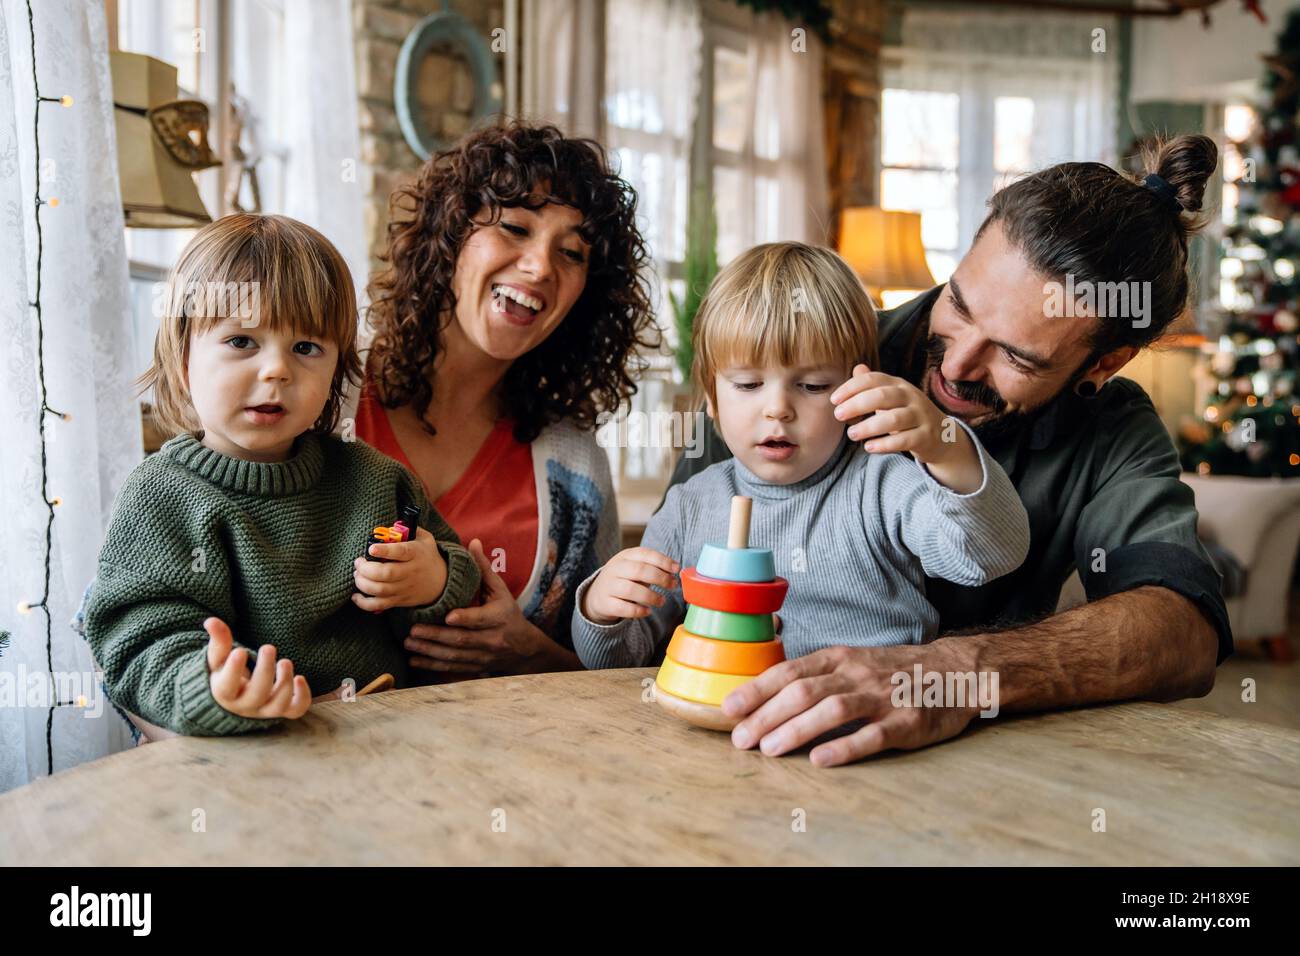 Family and childhood concept. Young parents spending time together with children at home. Stock Photo